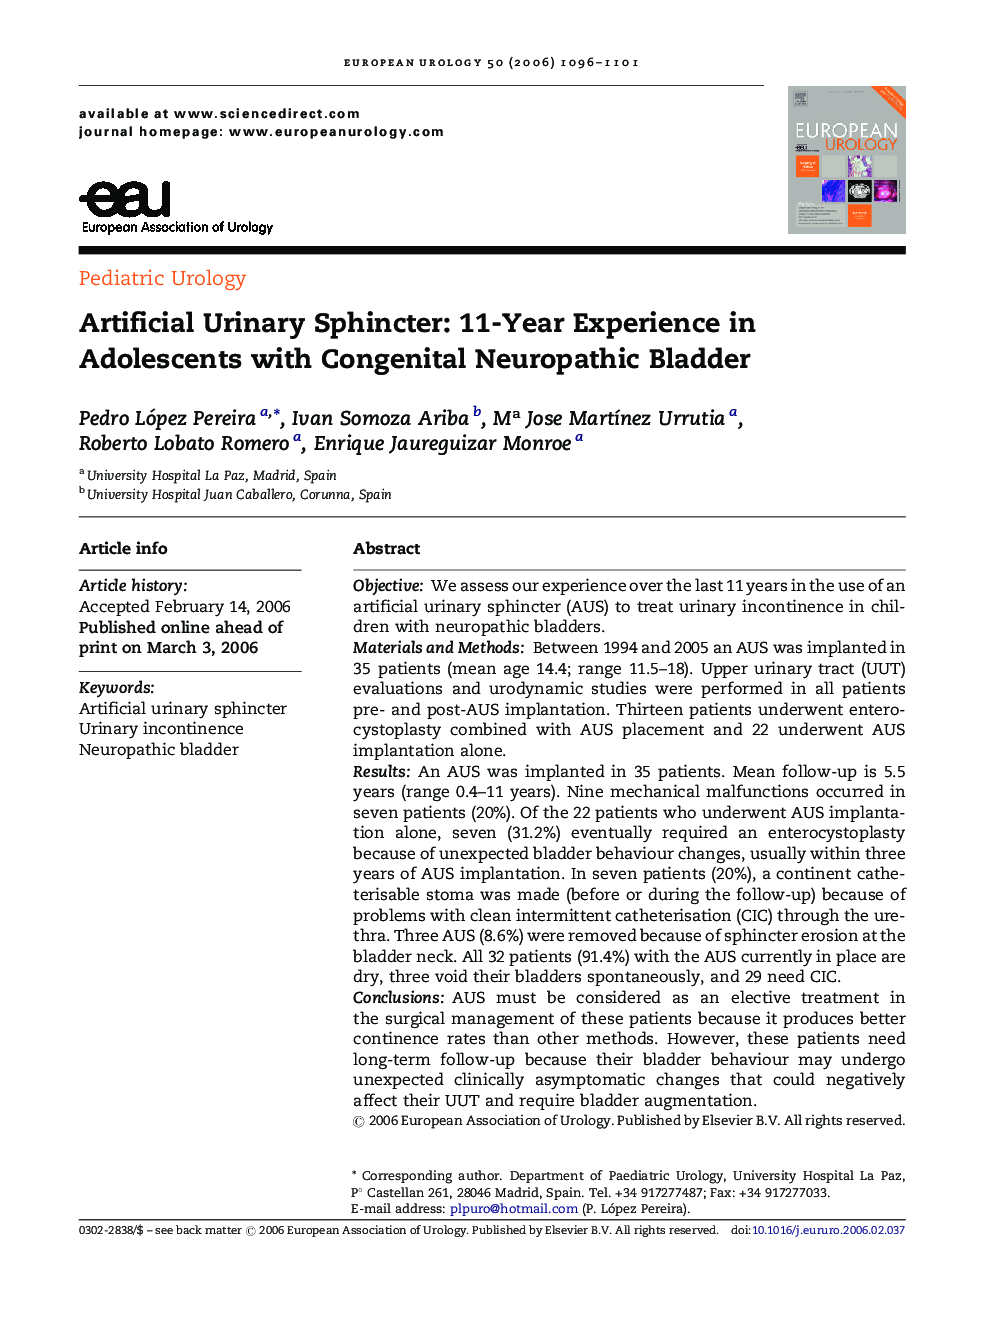 Artificial Urinary Sphincter: 11-Year Experience in Adolescents with Congenital Neuropathic Bladder